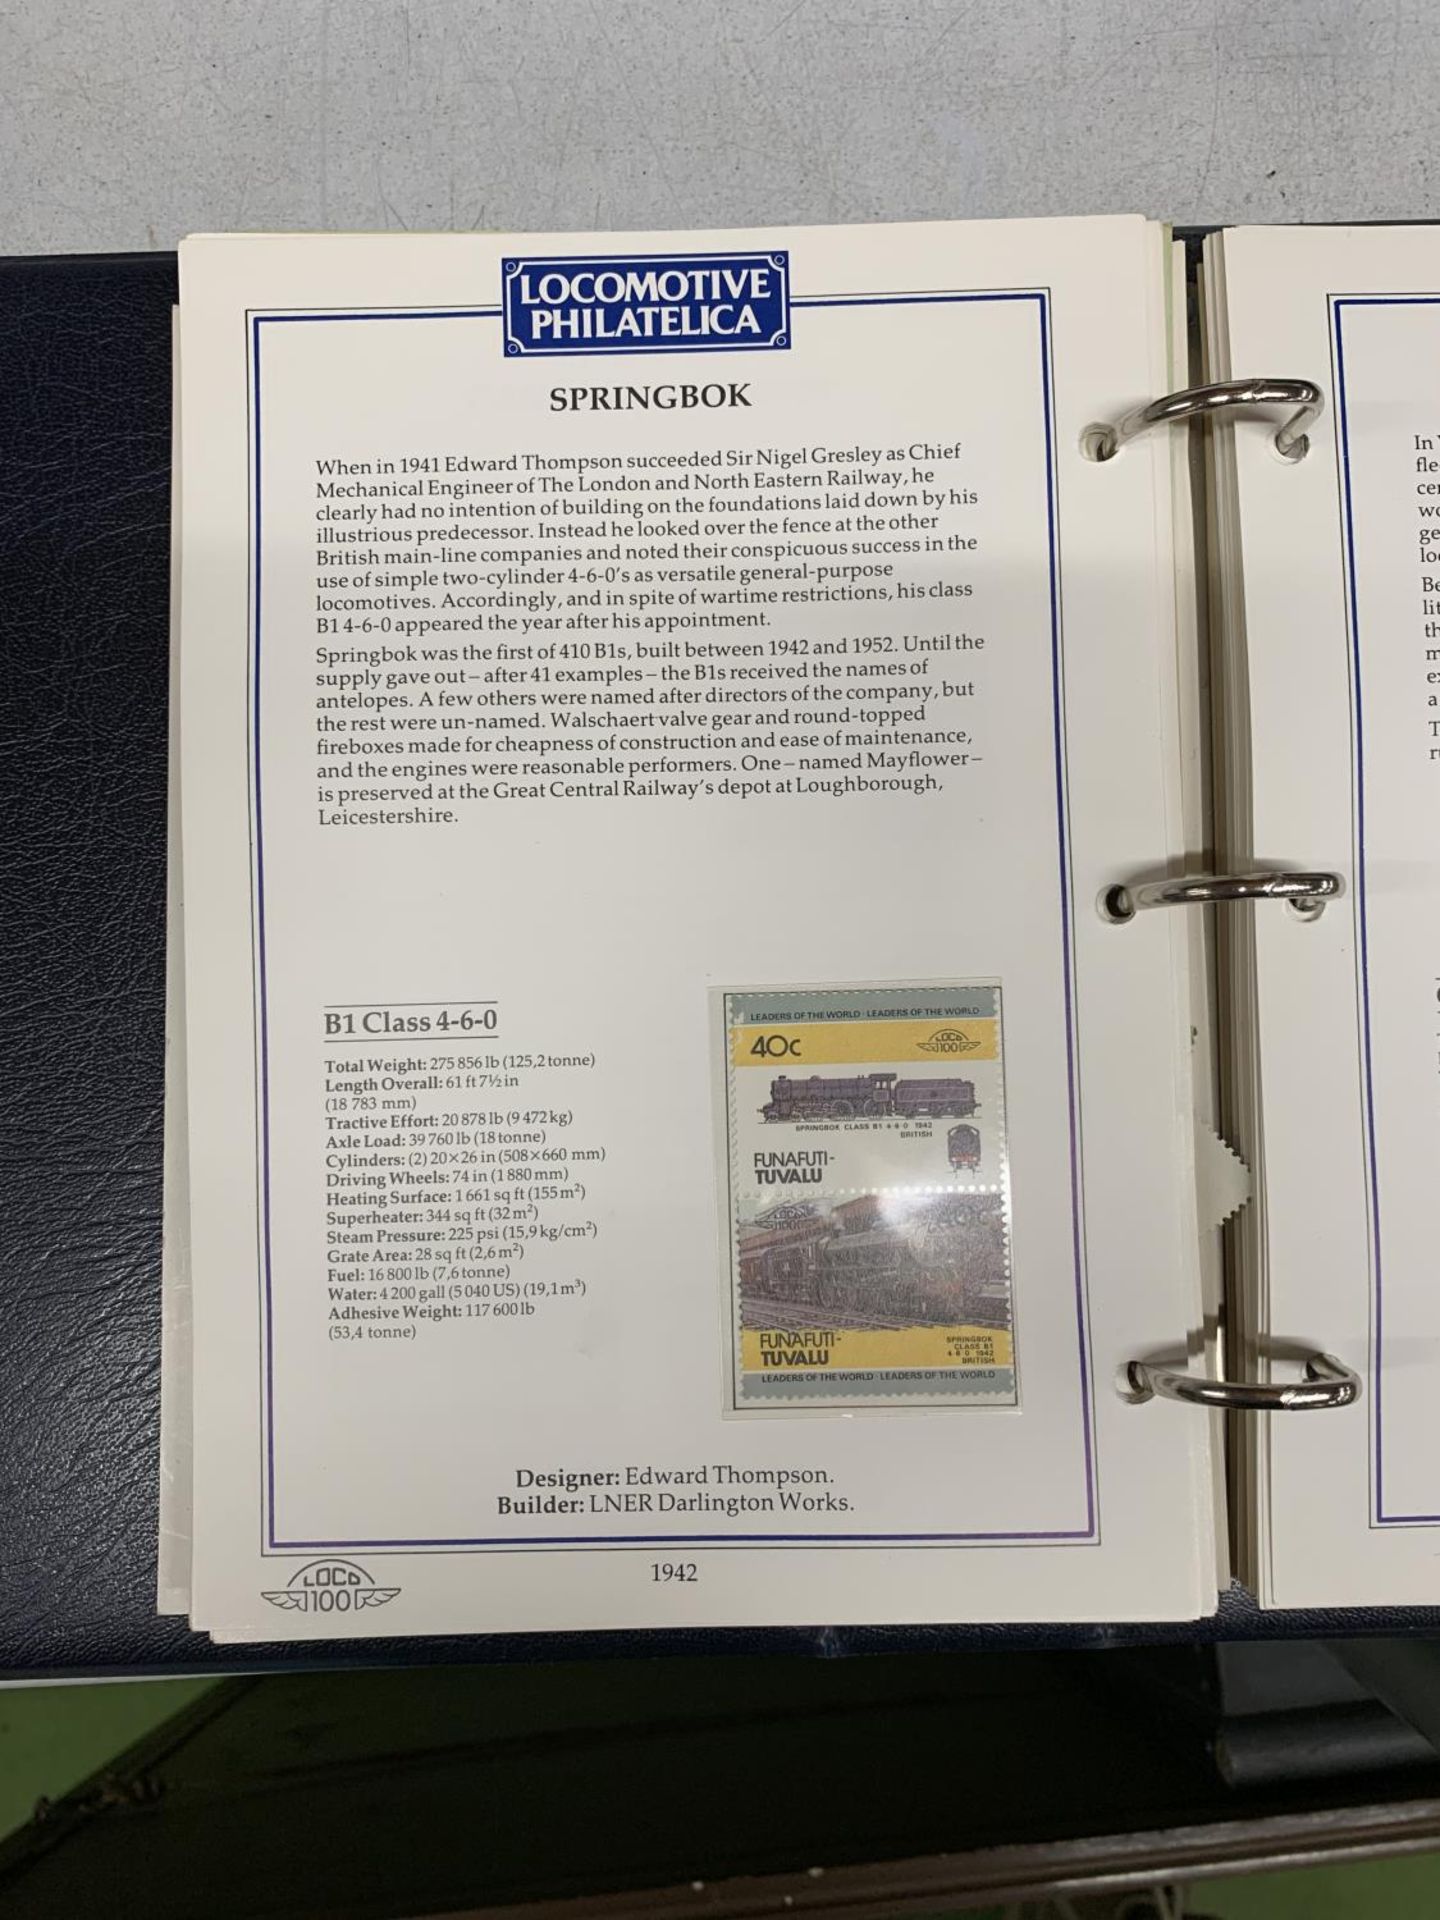 A LOCOMOTIVE PHILATELICA LEADERS OF THE WORLD REFERENCE BOOK, PLUS STAMPS - Image 2 of 3